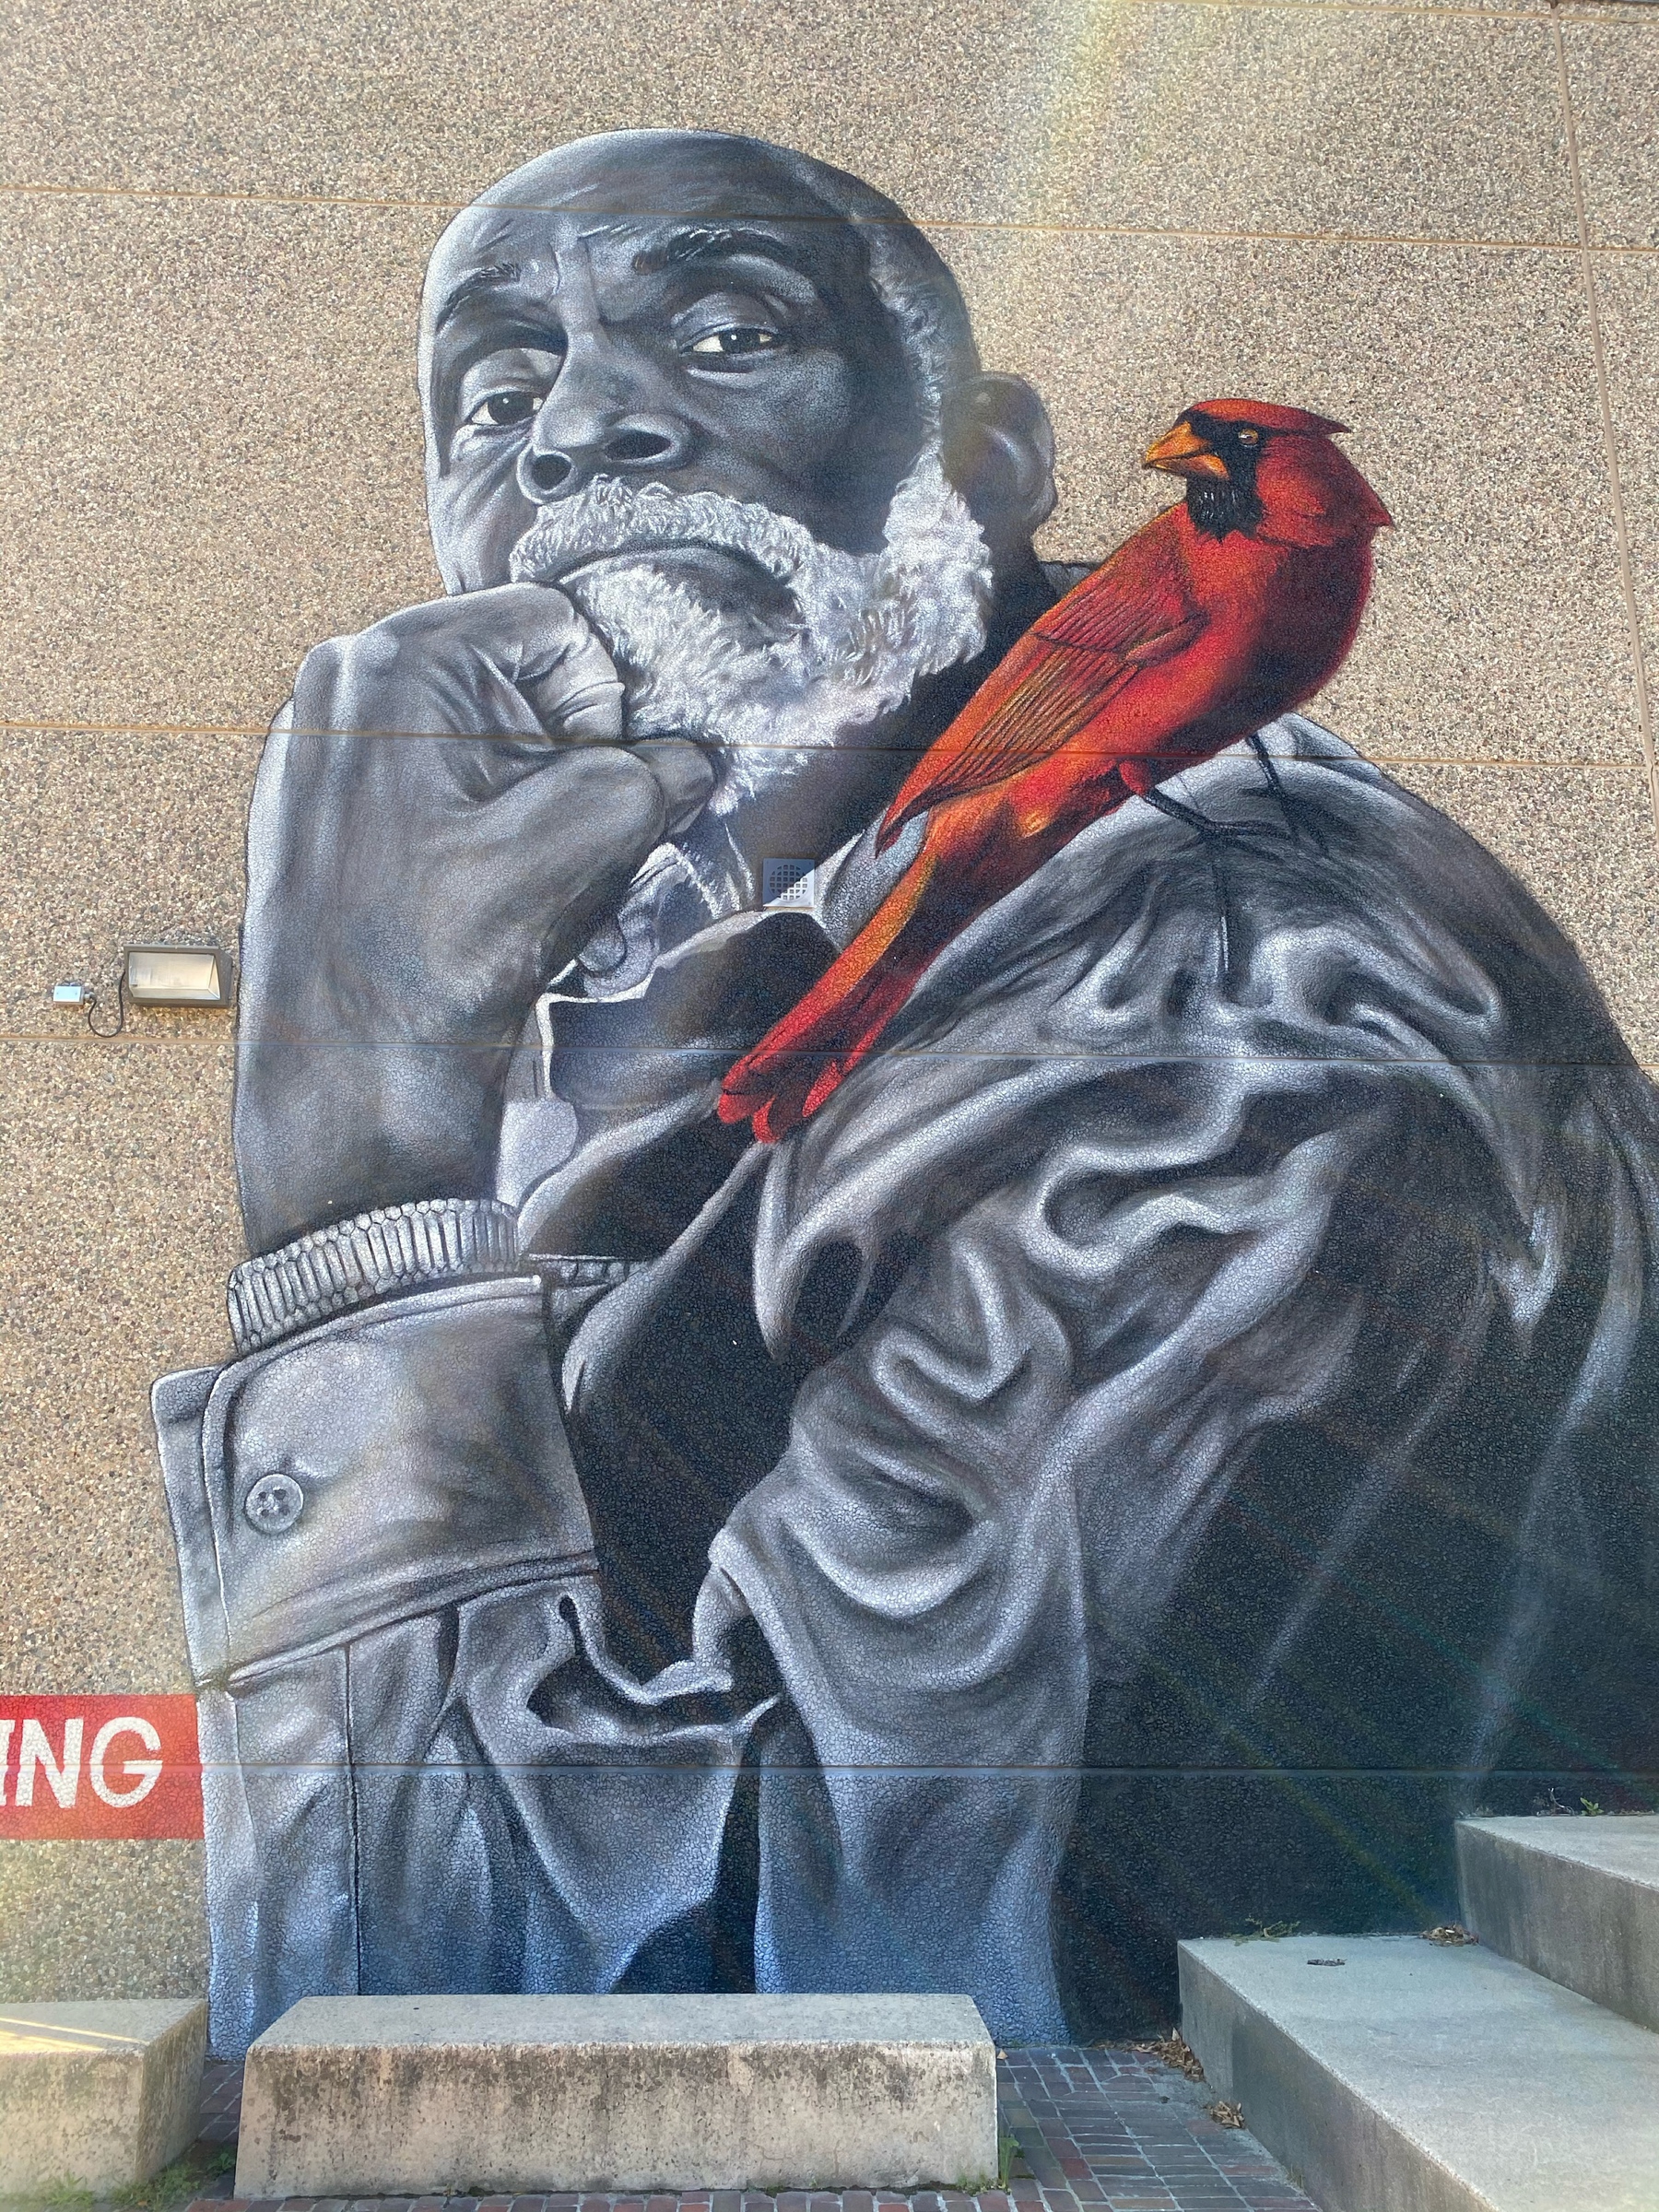 Mural of Mel King with a cardinal on his shoulder.